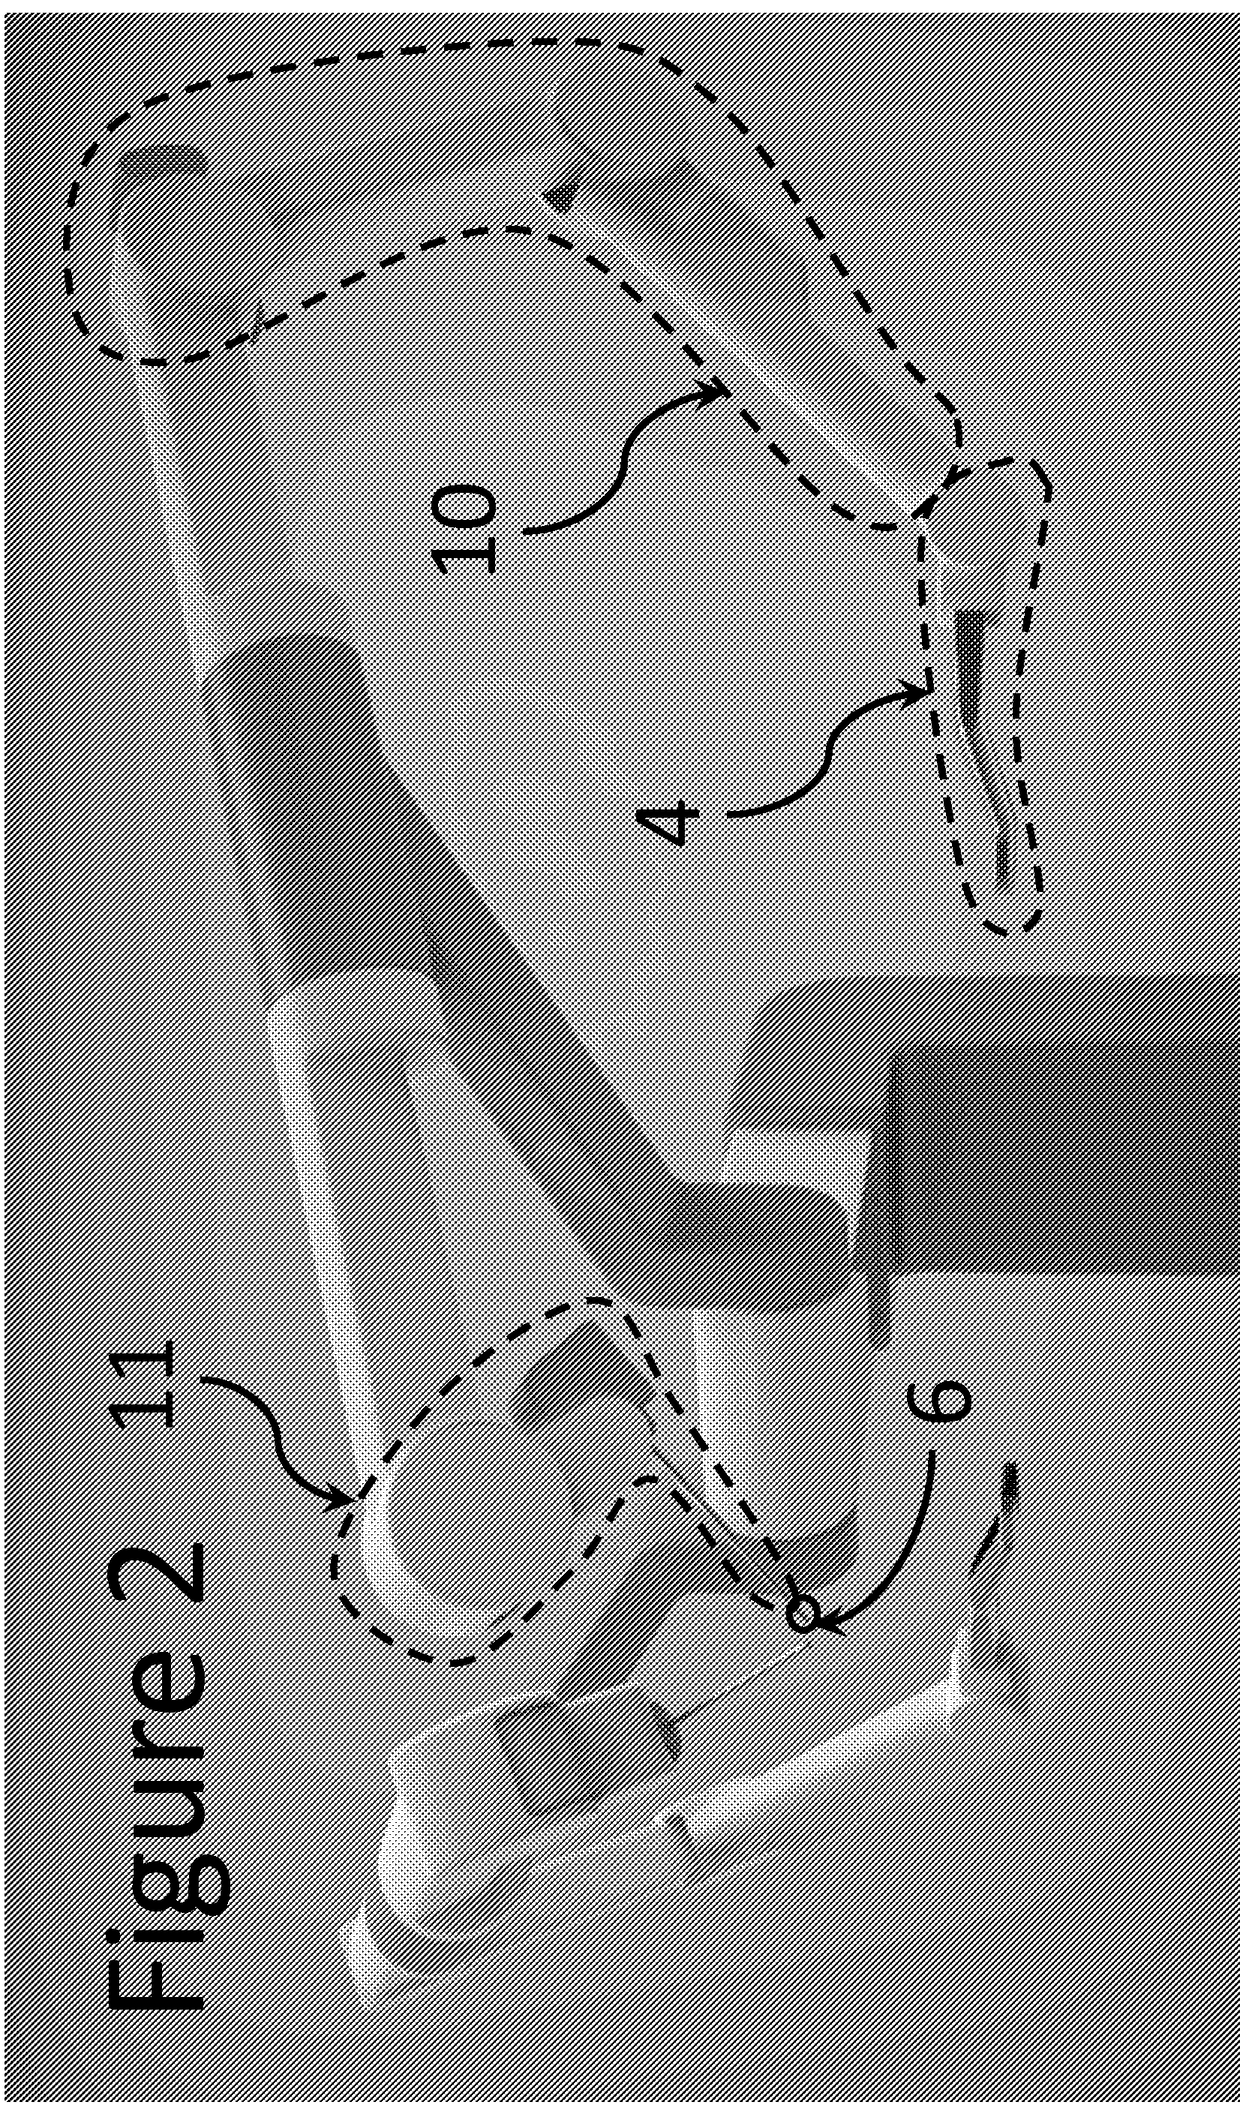 Surgical system for microsurgical techniques